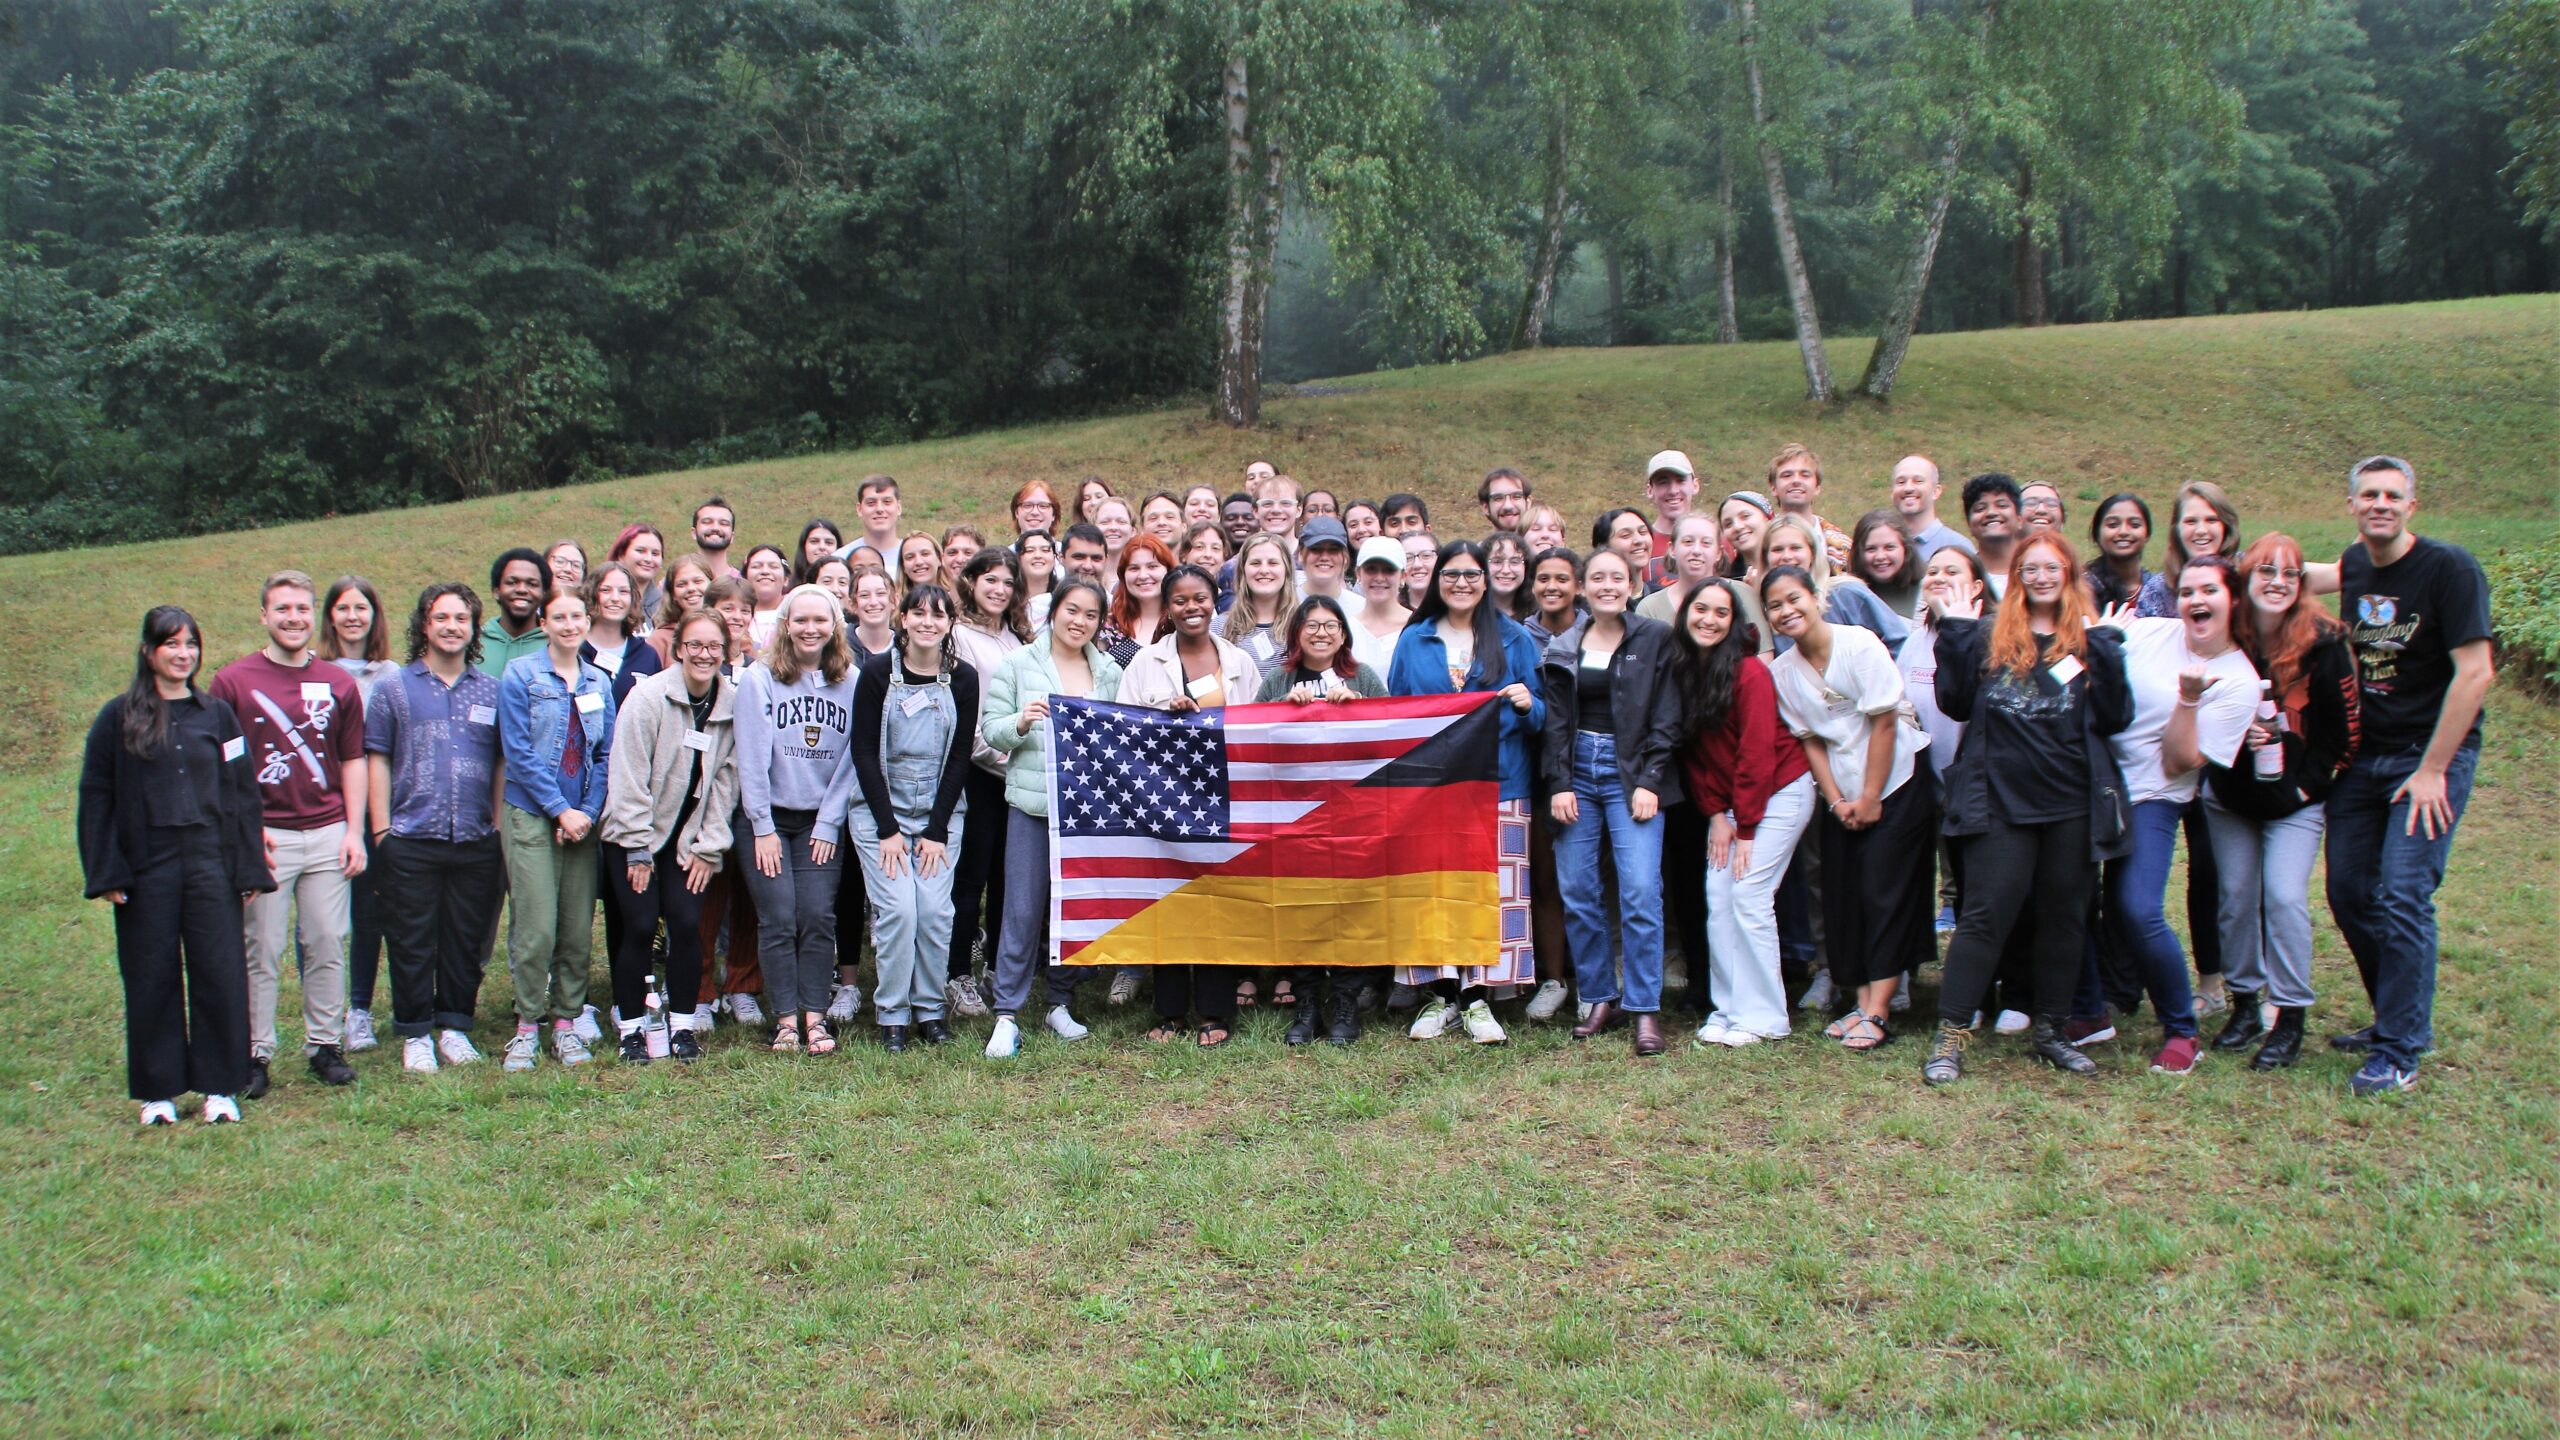 The 40th CBYX cohort poses for a large group photo in an open field with trees in the background. In the middle, they hold a flag which is a diagonal split between the flags of the US and Germany.